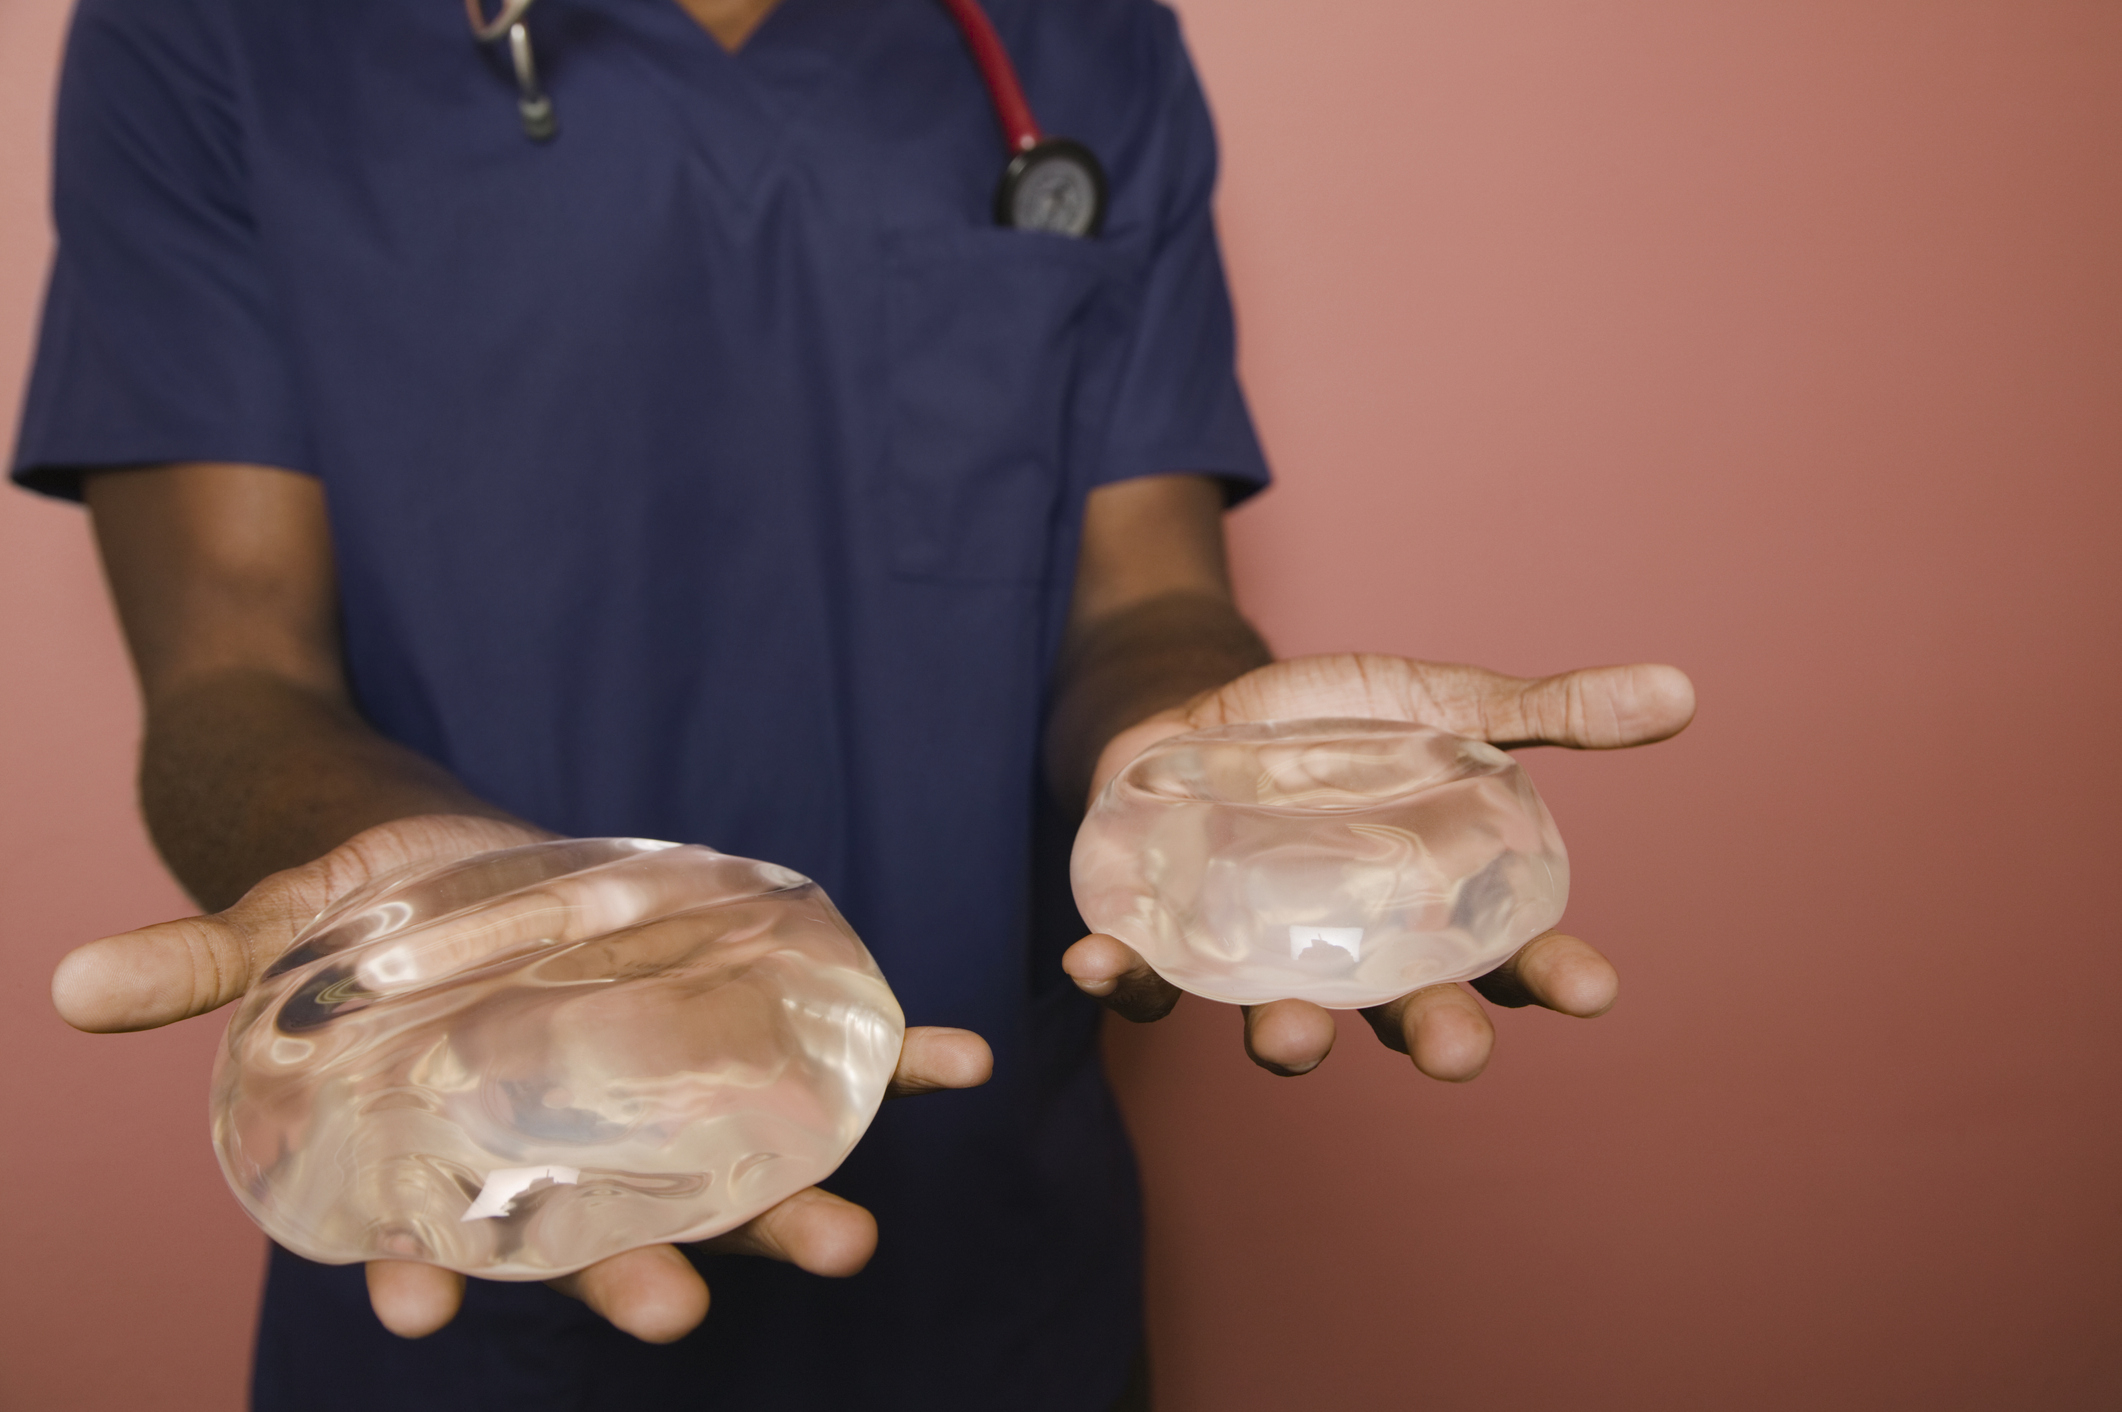 Medical professional holding up breast implants